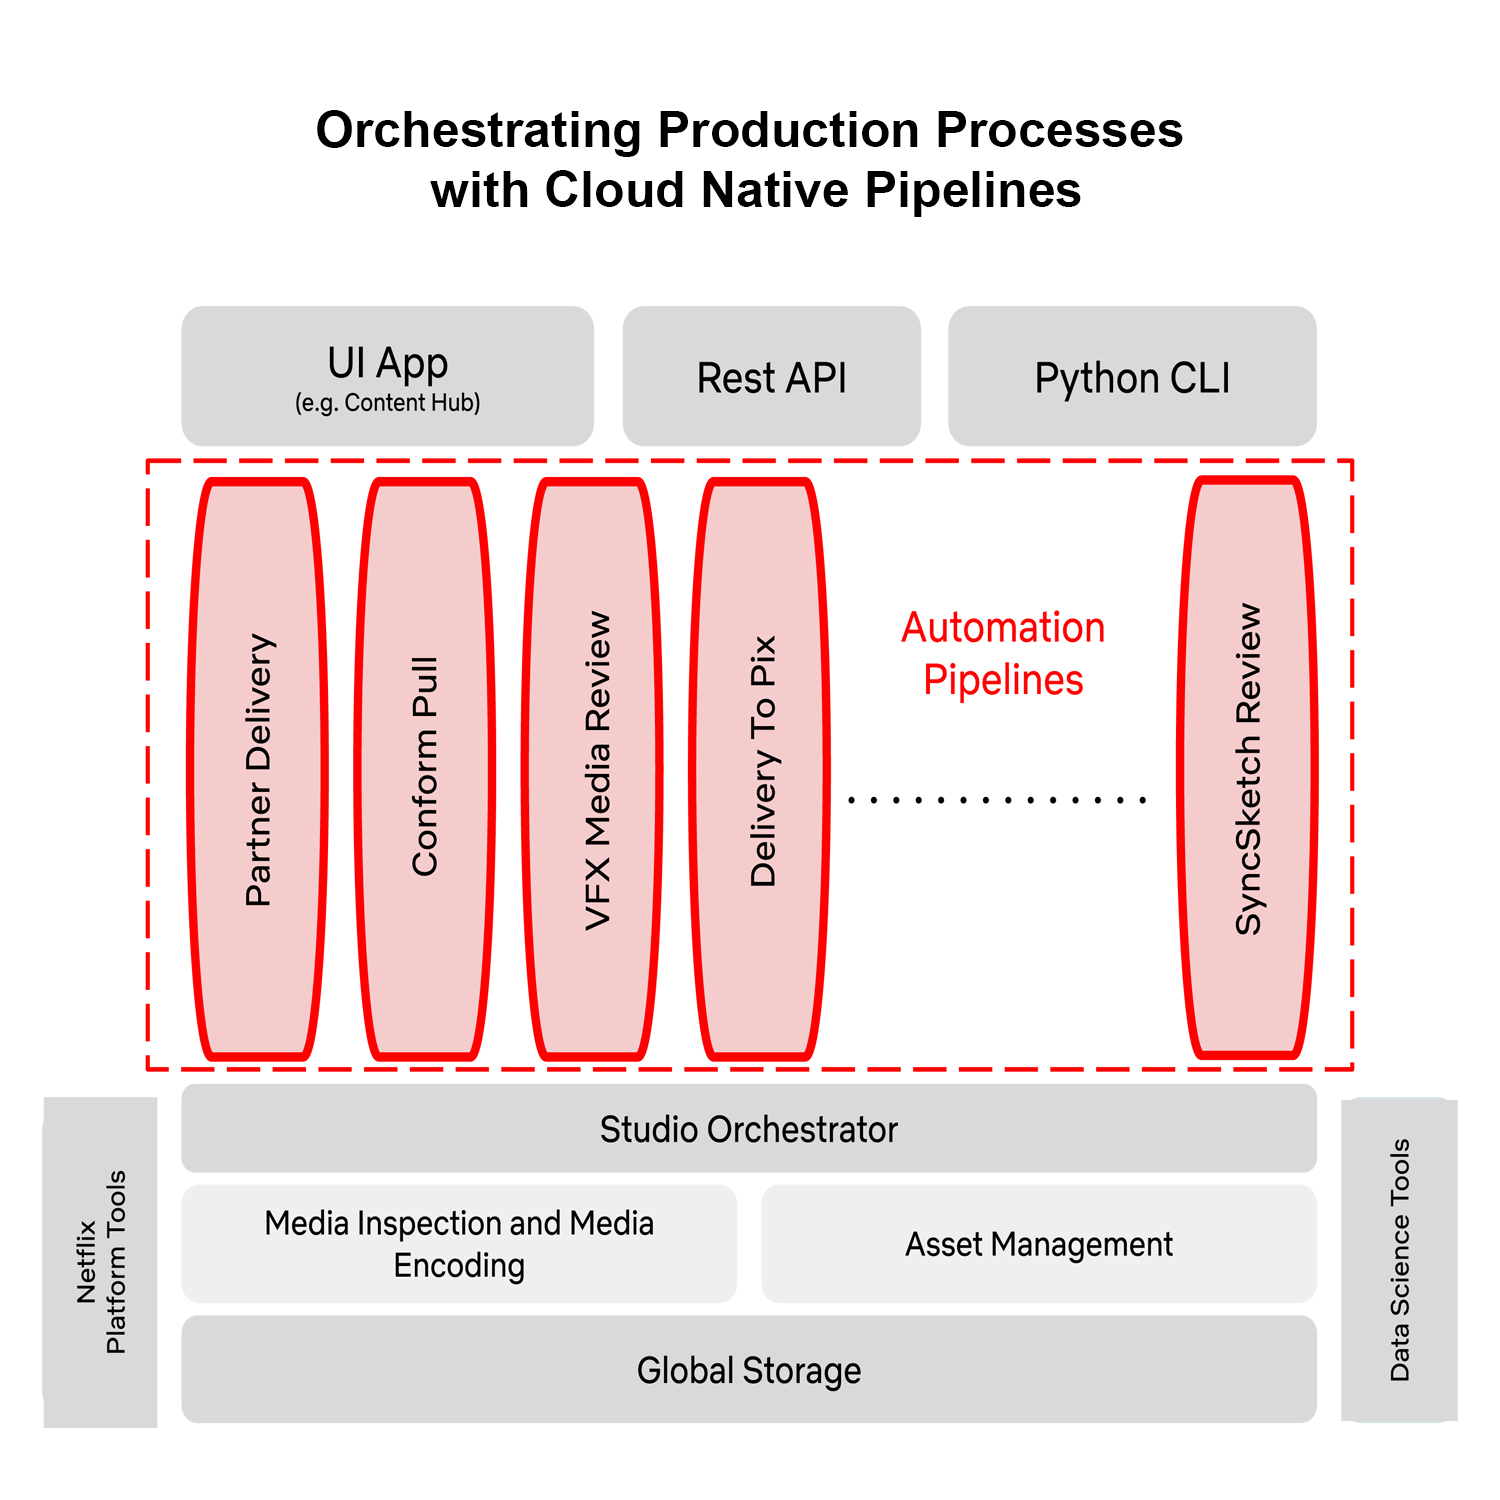 Orchestrating Production Processes with Cloud Native Pipelines